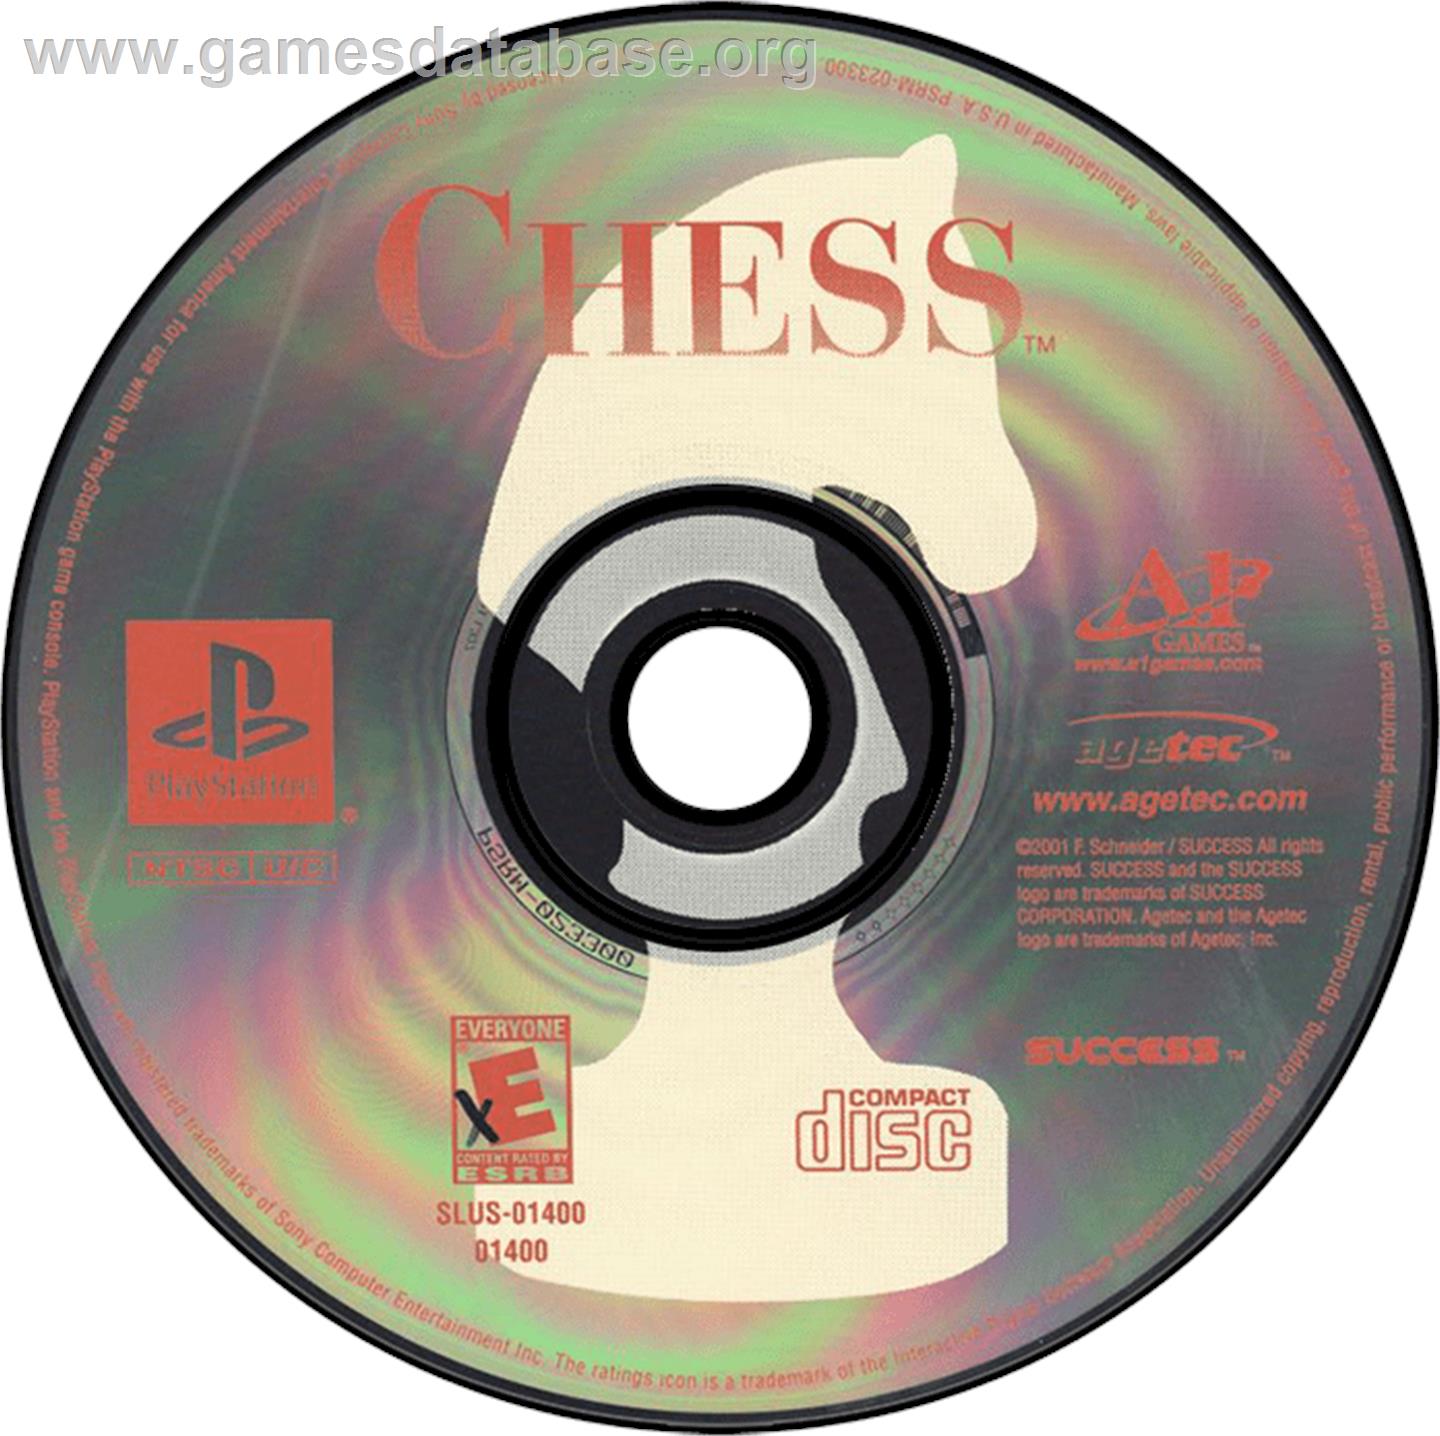 Chess - Sony Playstation - Artwork - Disc